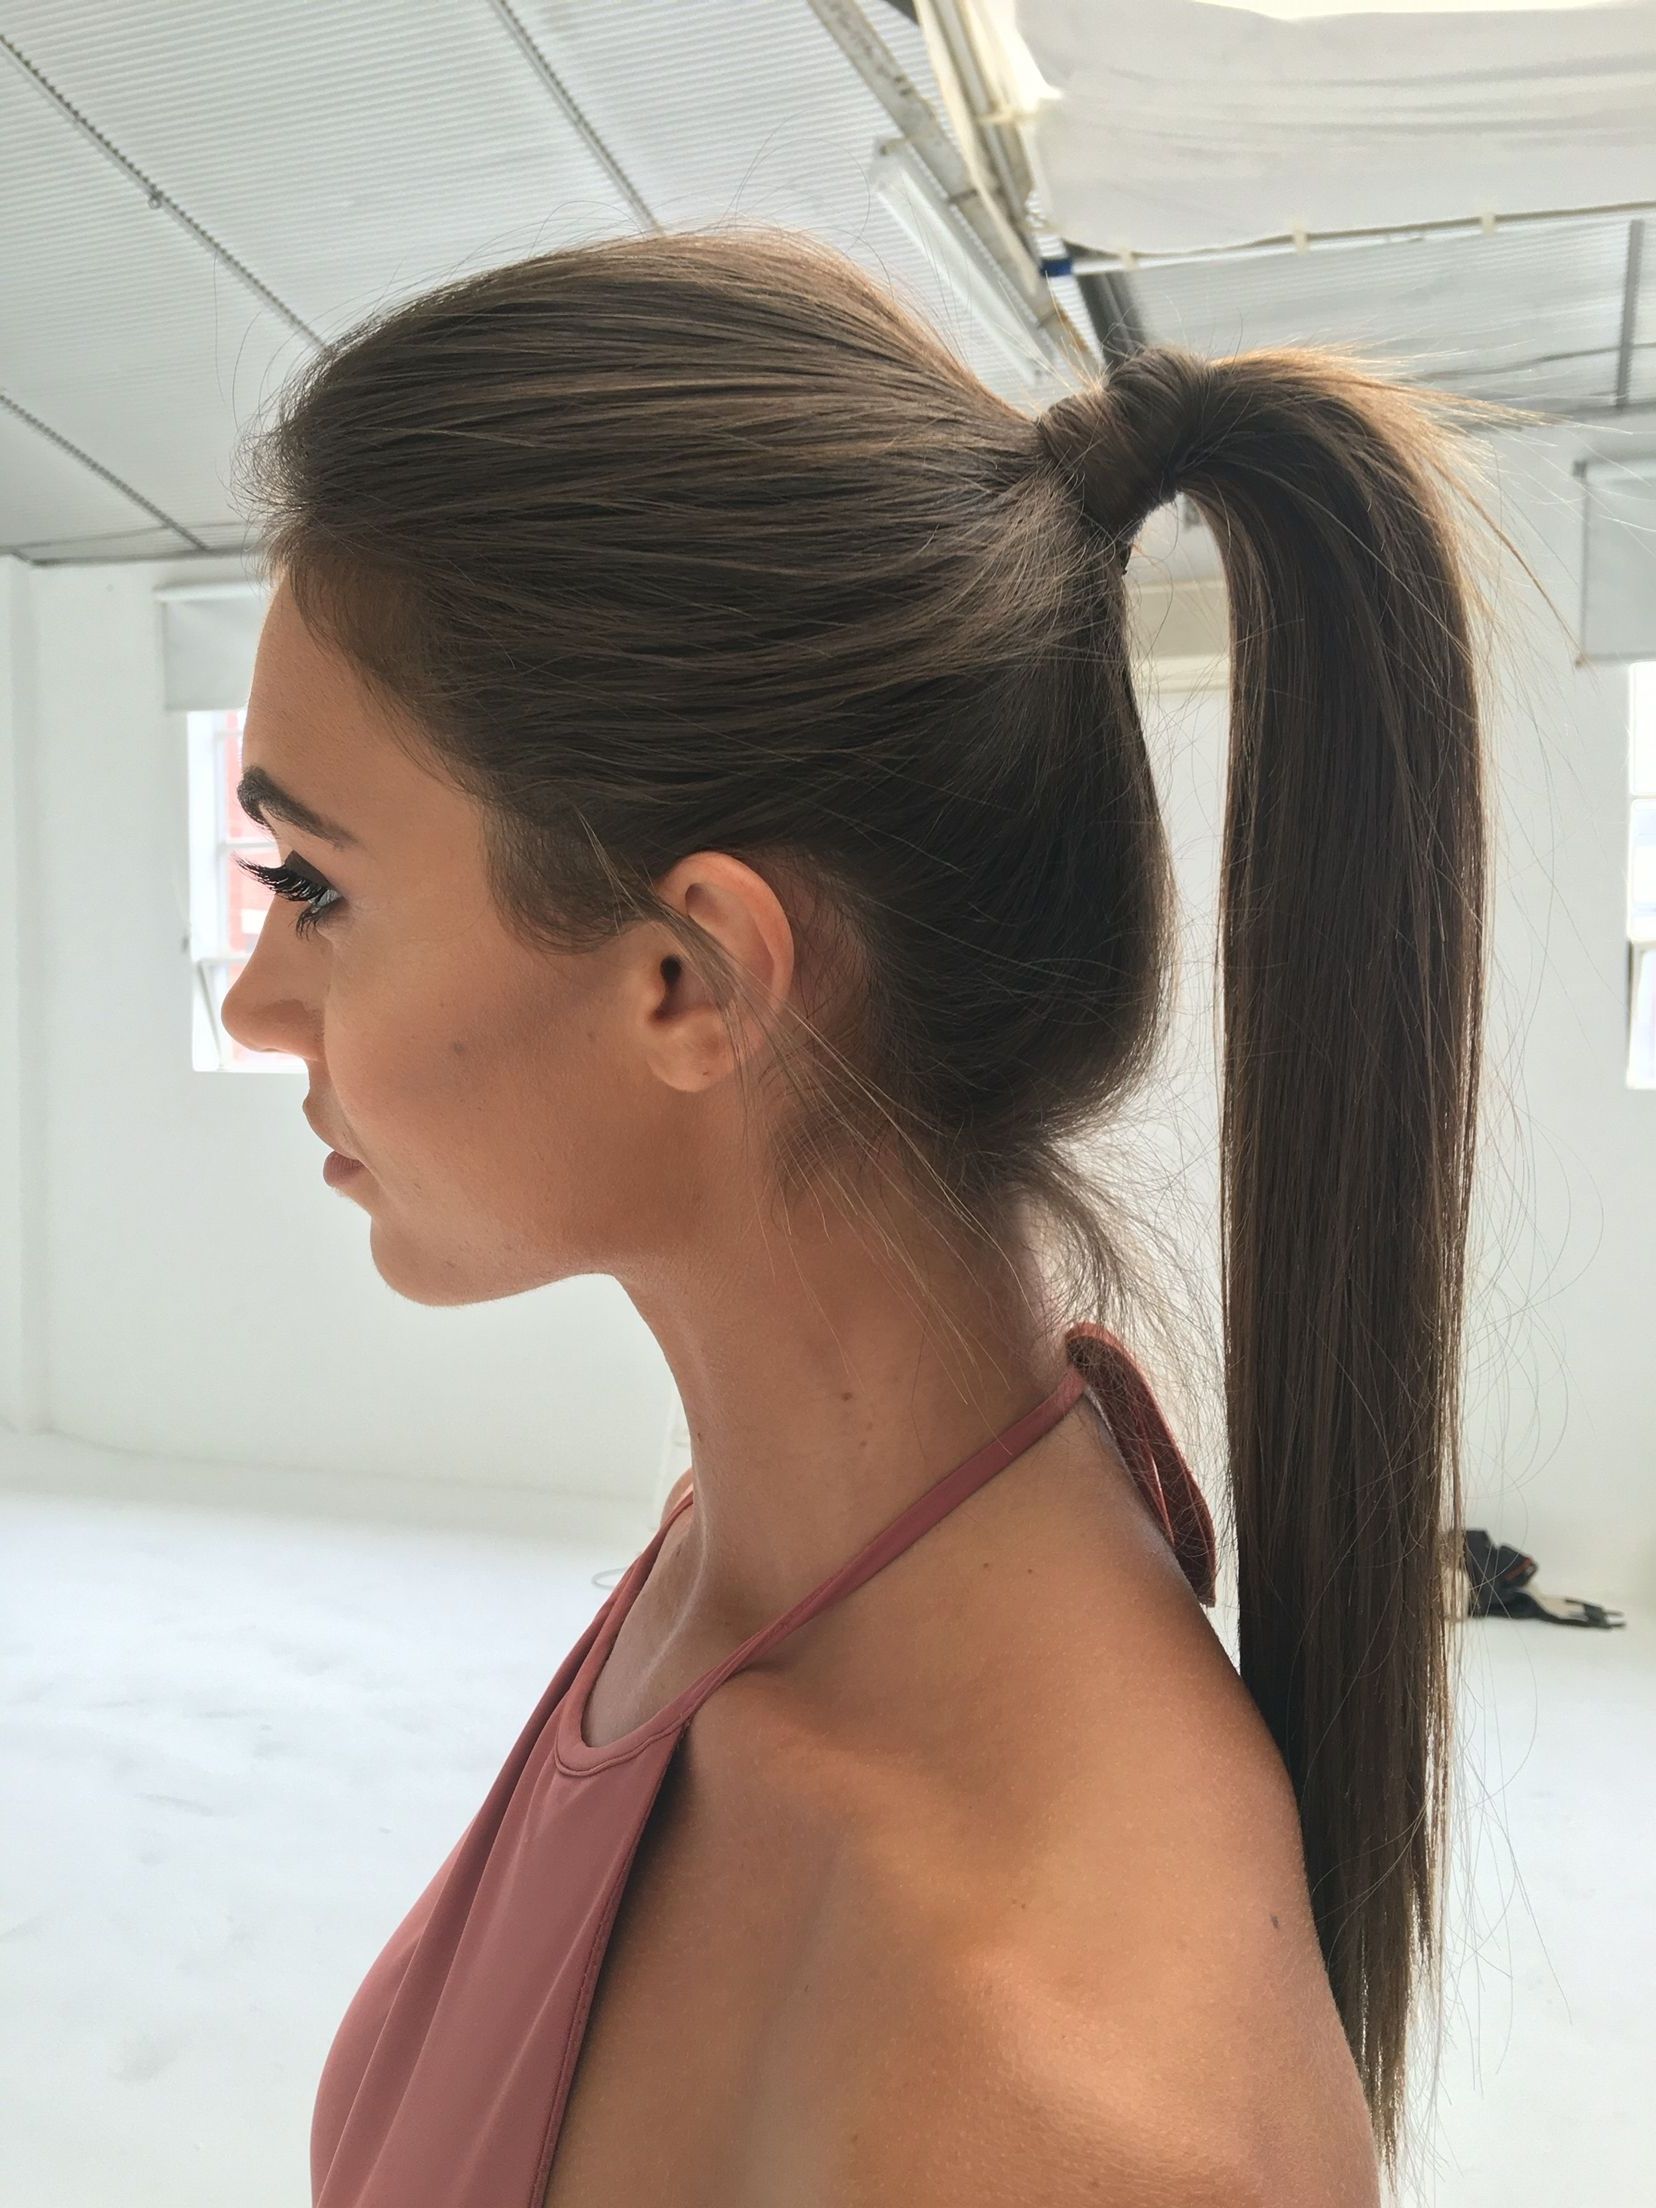 Prom Intended For Current High Sleek Ponytail Hairstyles (View 13 of 20)